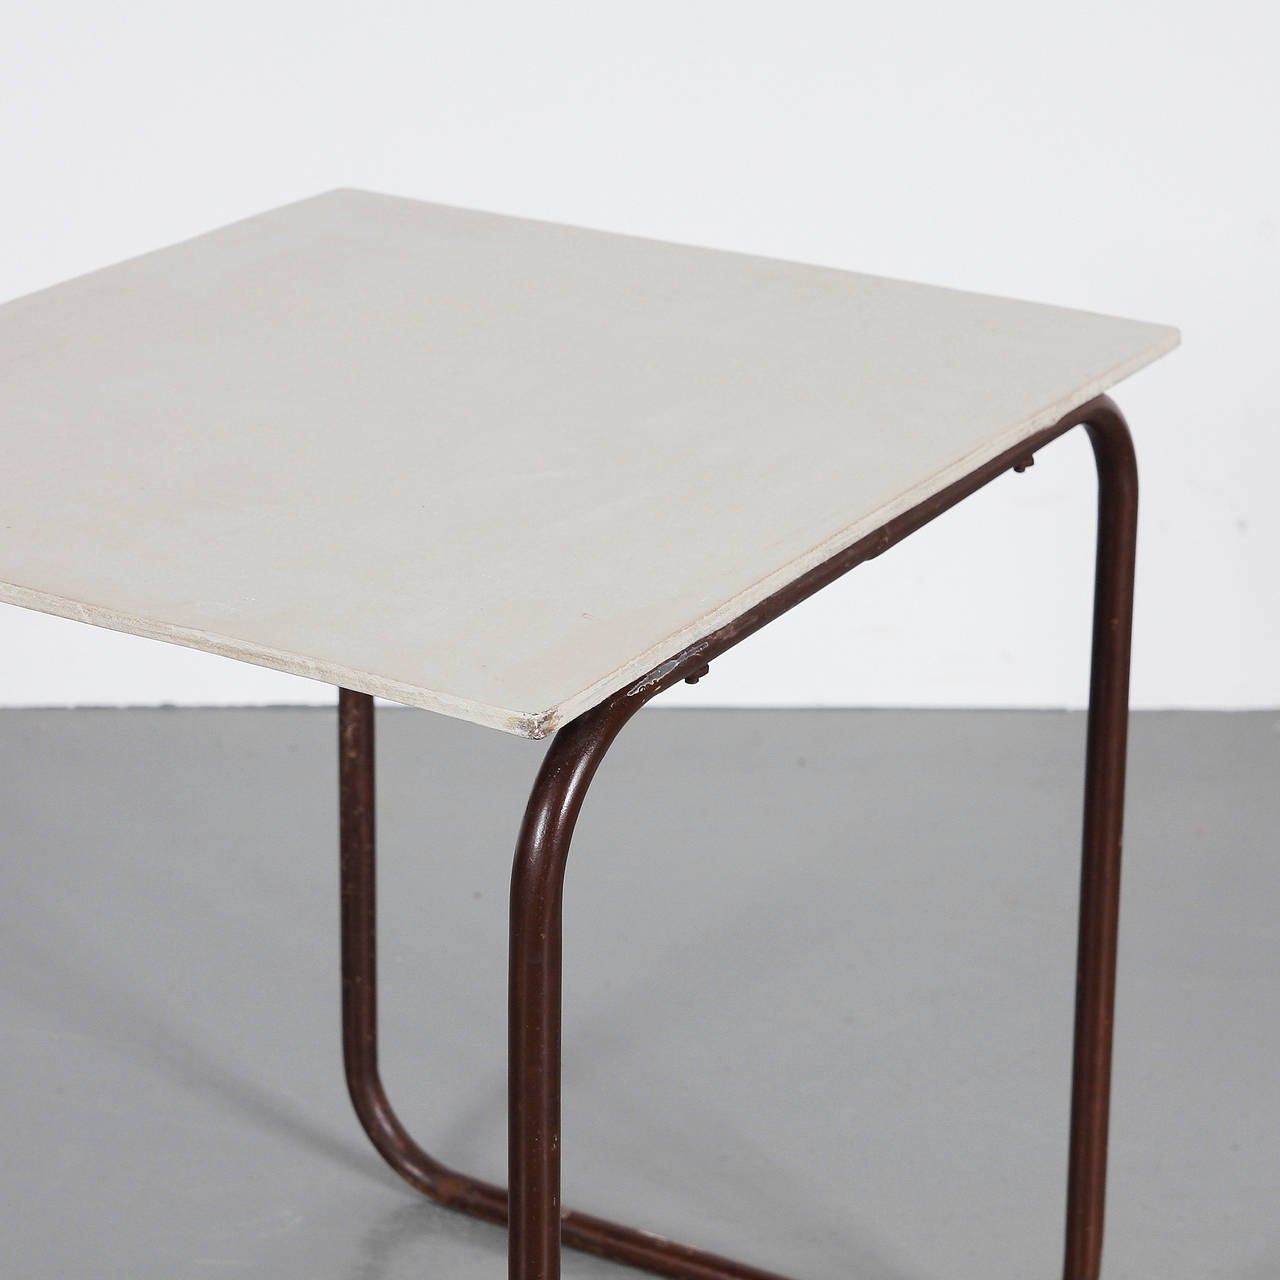 Mid-20th Century Modernist Dutch Side Table, circa 1950 - Free Shipping